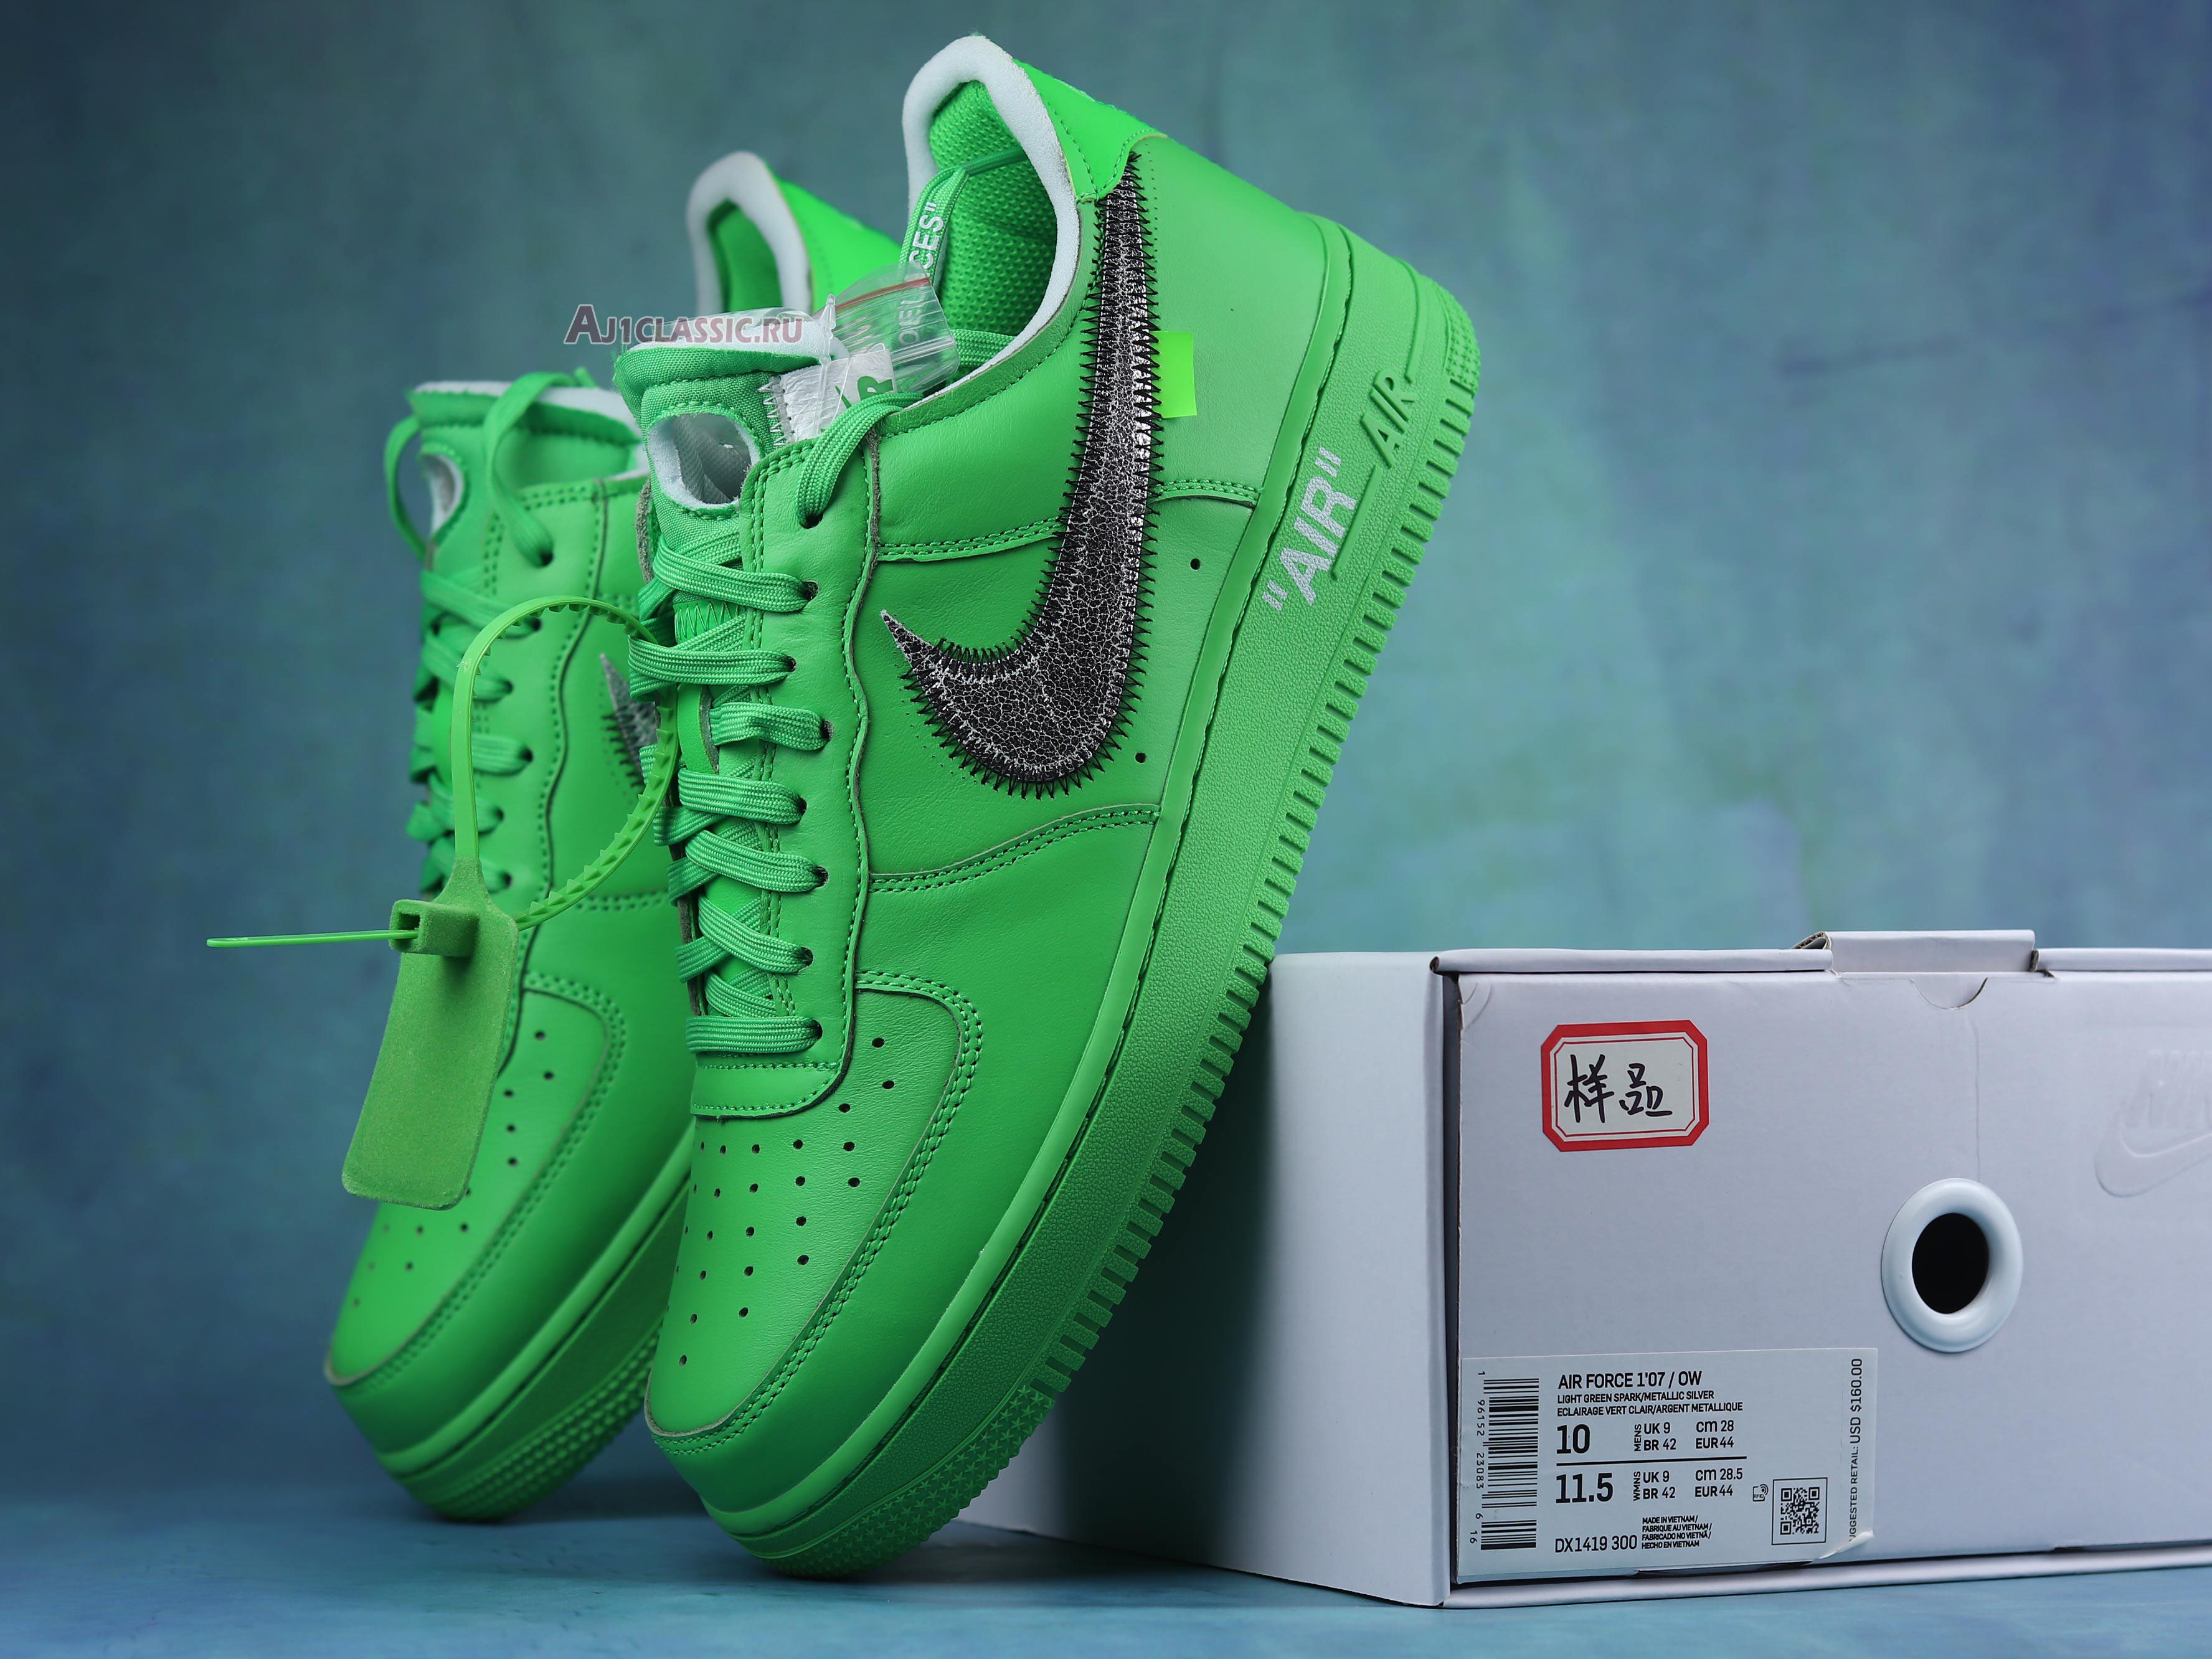 Off-White x Nike Air Force 1 Low "Brooklyn" DX1419-300